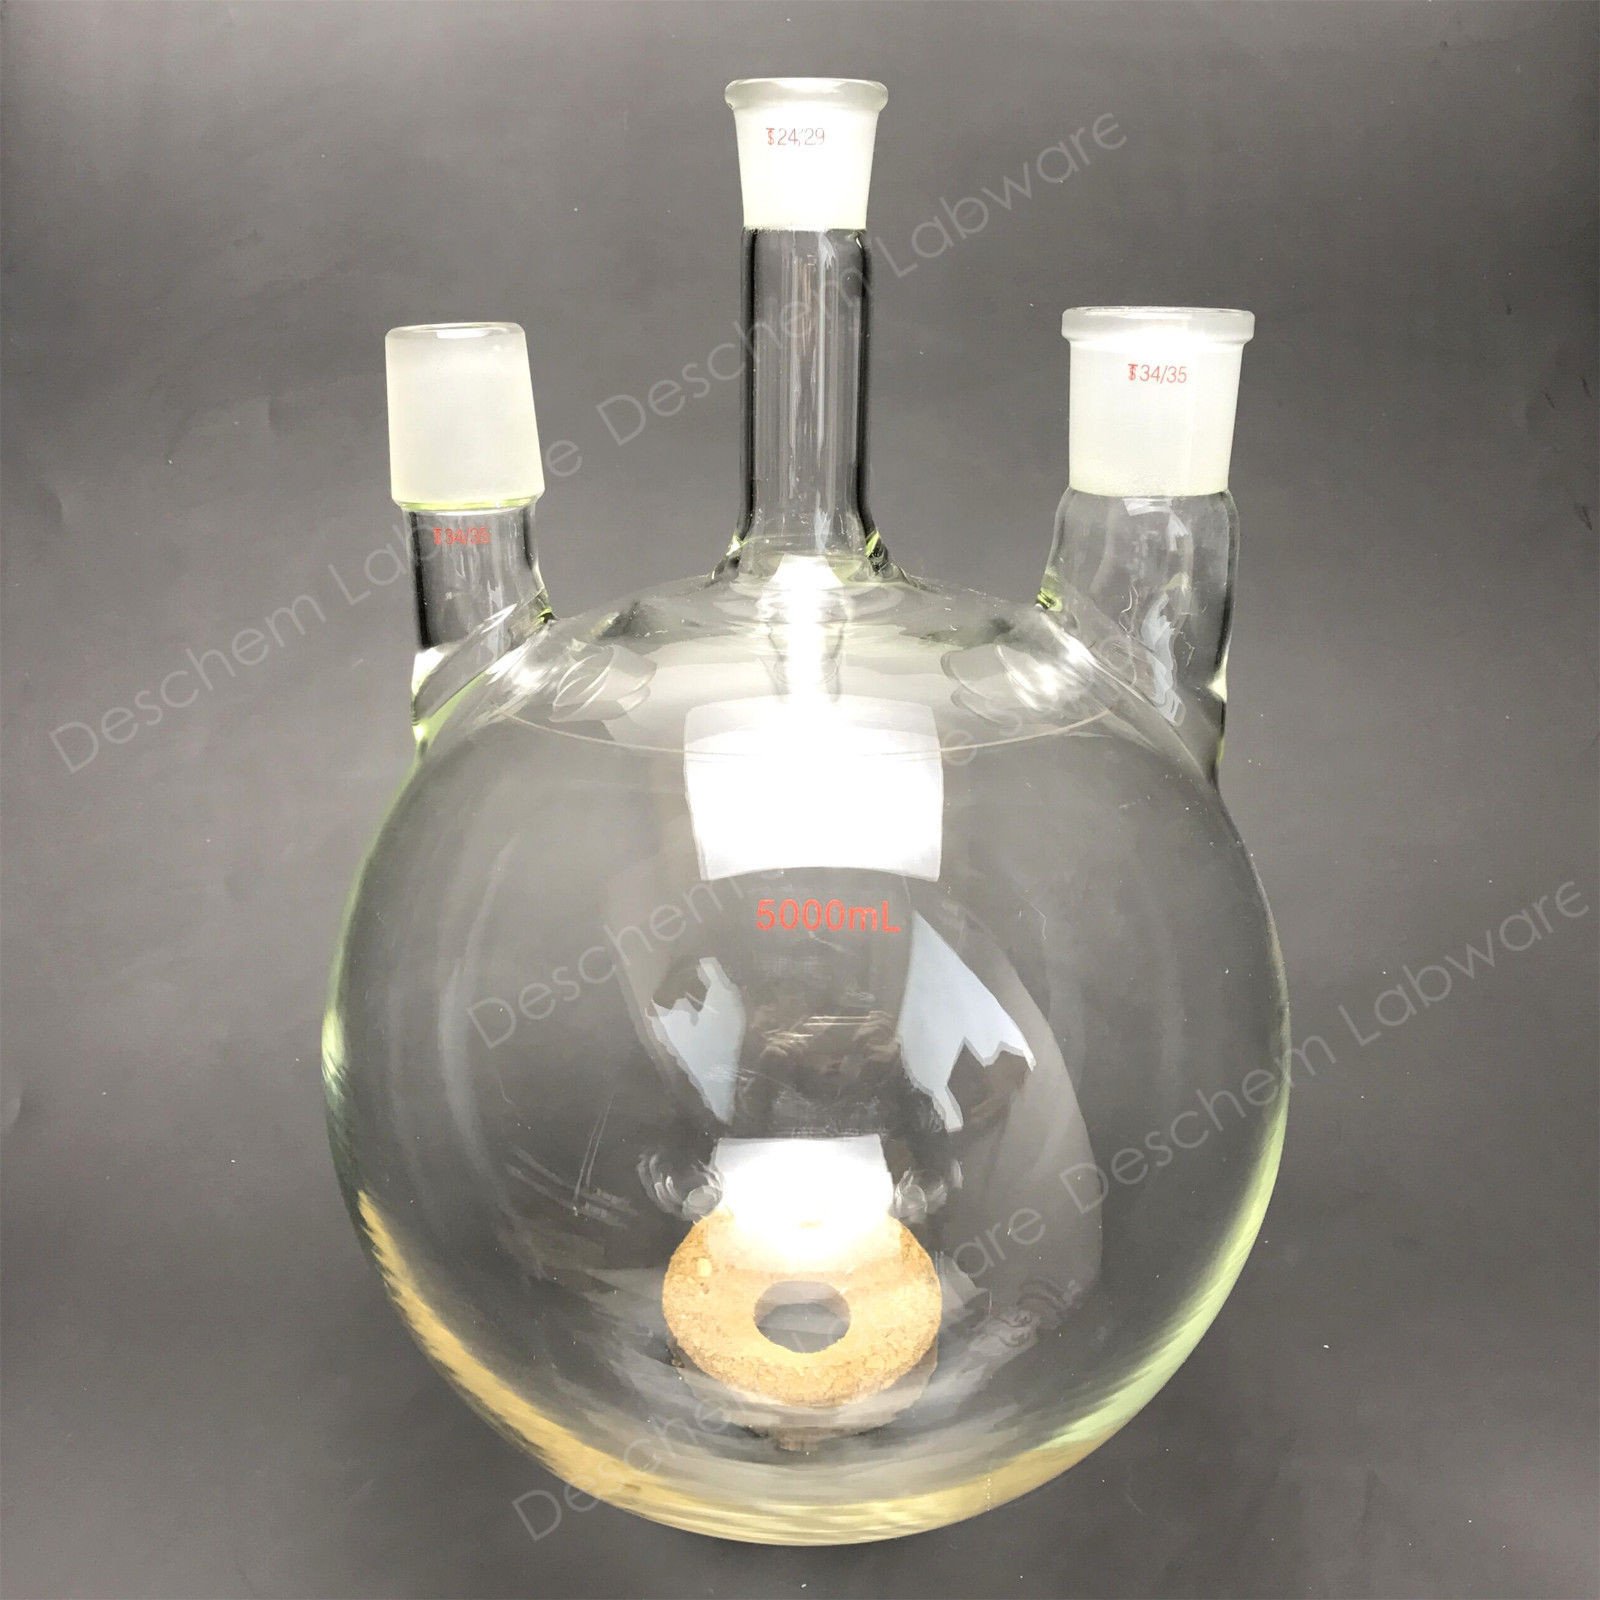 24 Lovely Long Neck Clear Glass Vase 2024 free download long neck clear glass vase of buy glass cone and get free shipping on aliexpress com with 5000ml 3 neck glass reaction flask centrel 24 29 socket 34 35 socket cone side